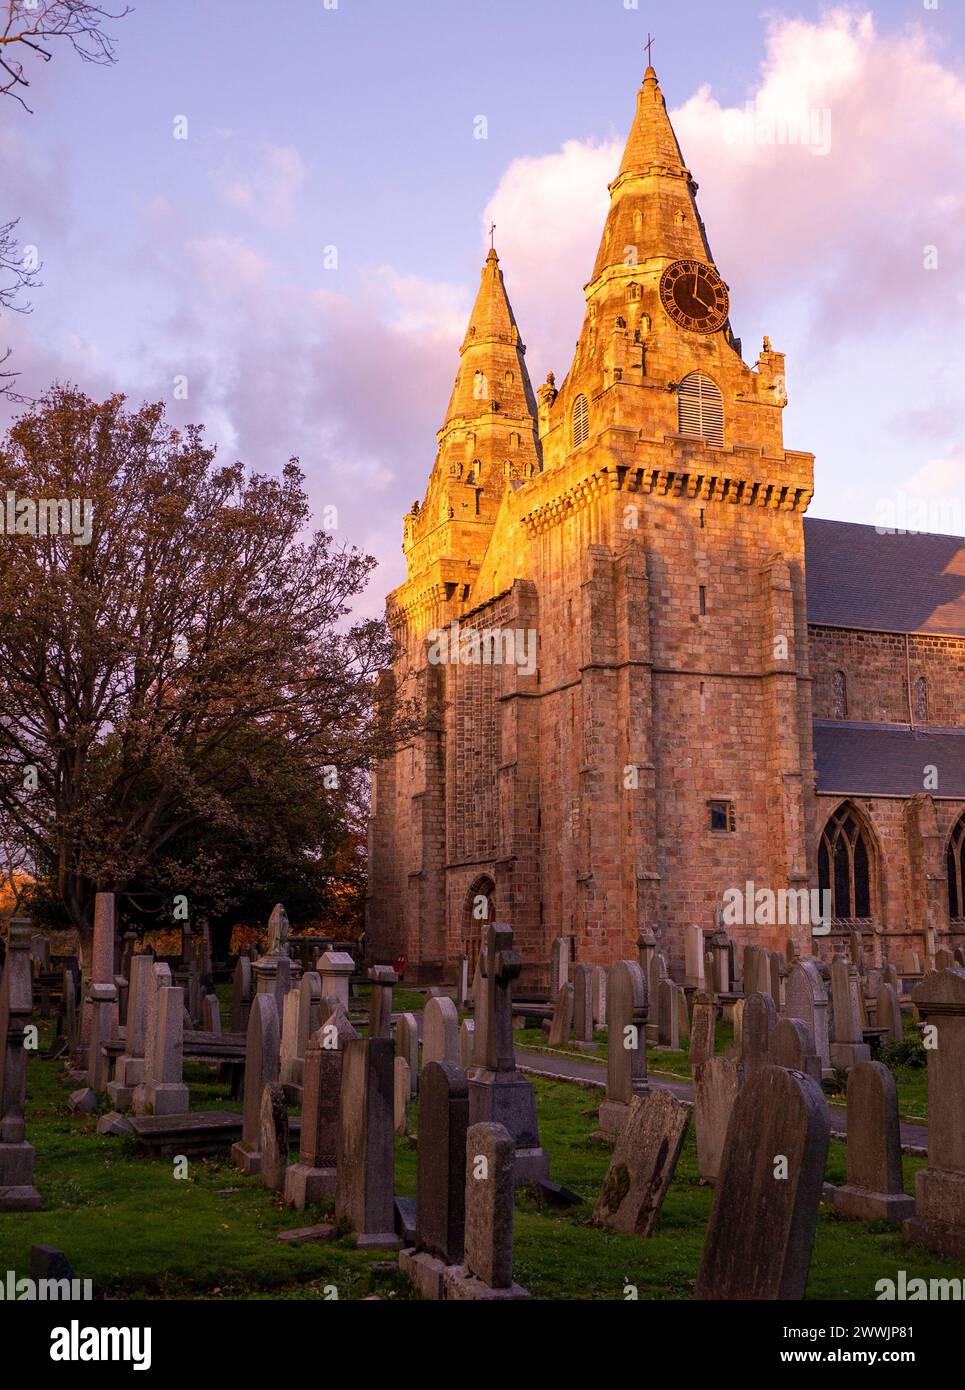 The west front and graveyard of St Machar's Cathedral church at sunset, The Chanonry, Old Aberdeen, Aberdeen,Aberdeenshire, Scotland, UK Stock Photo